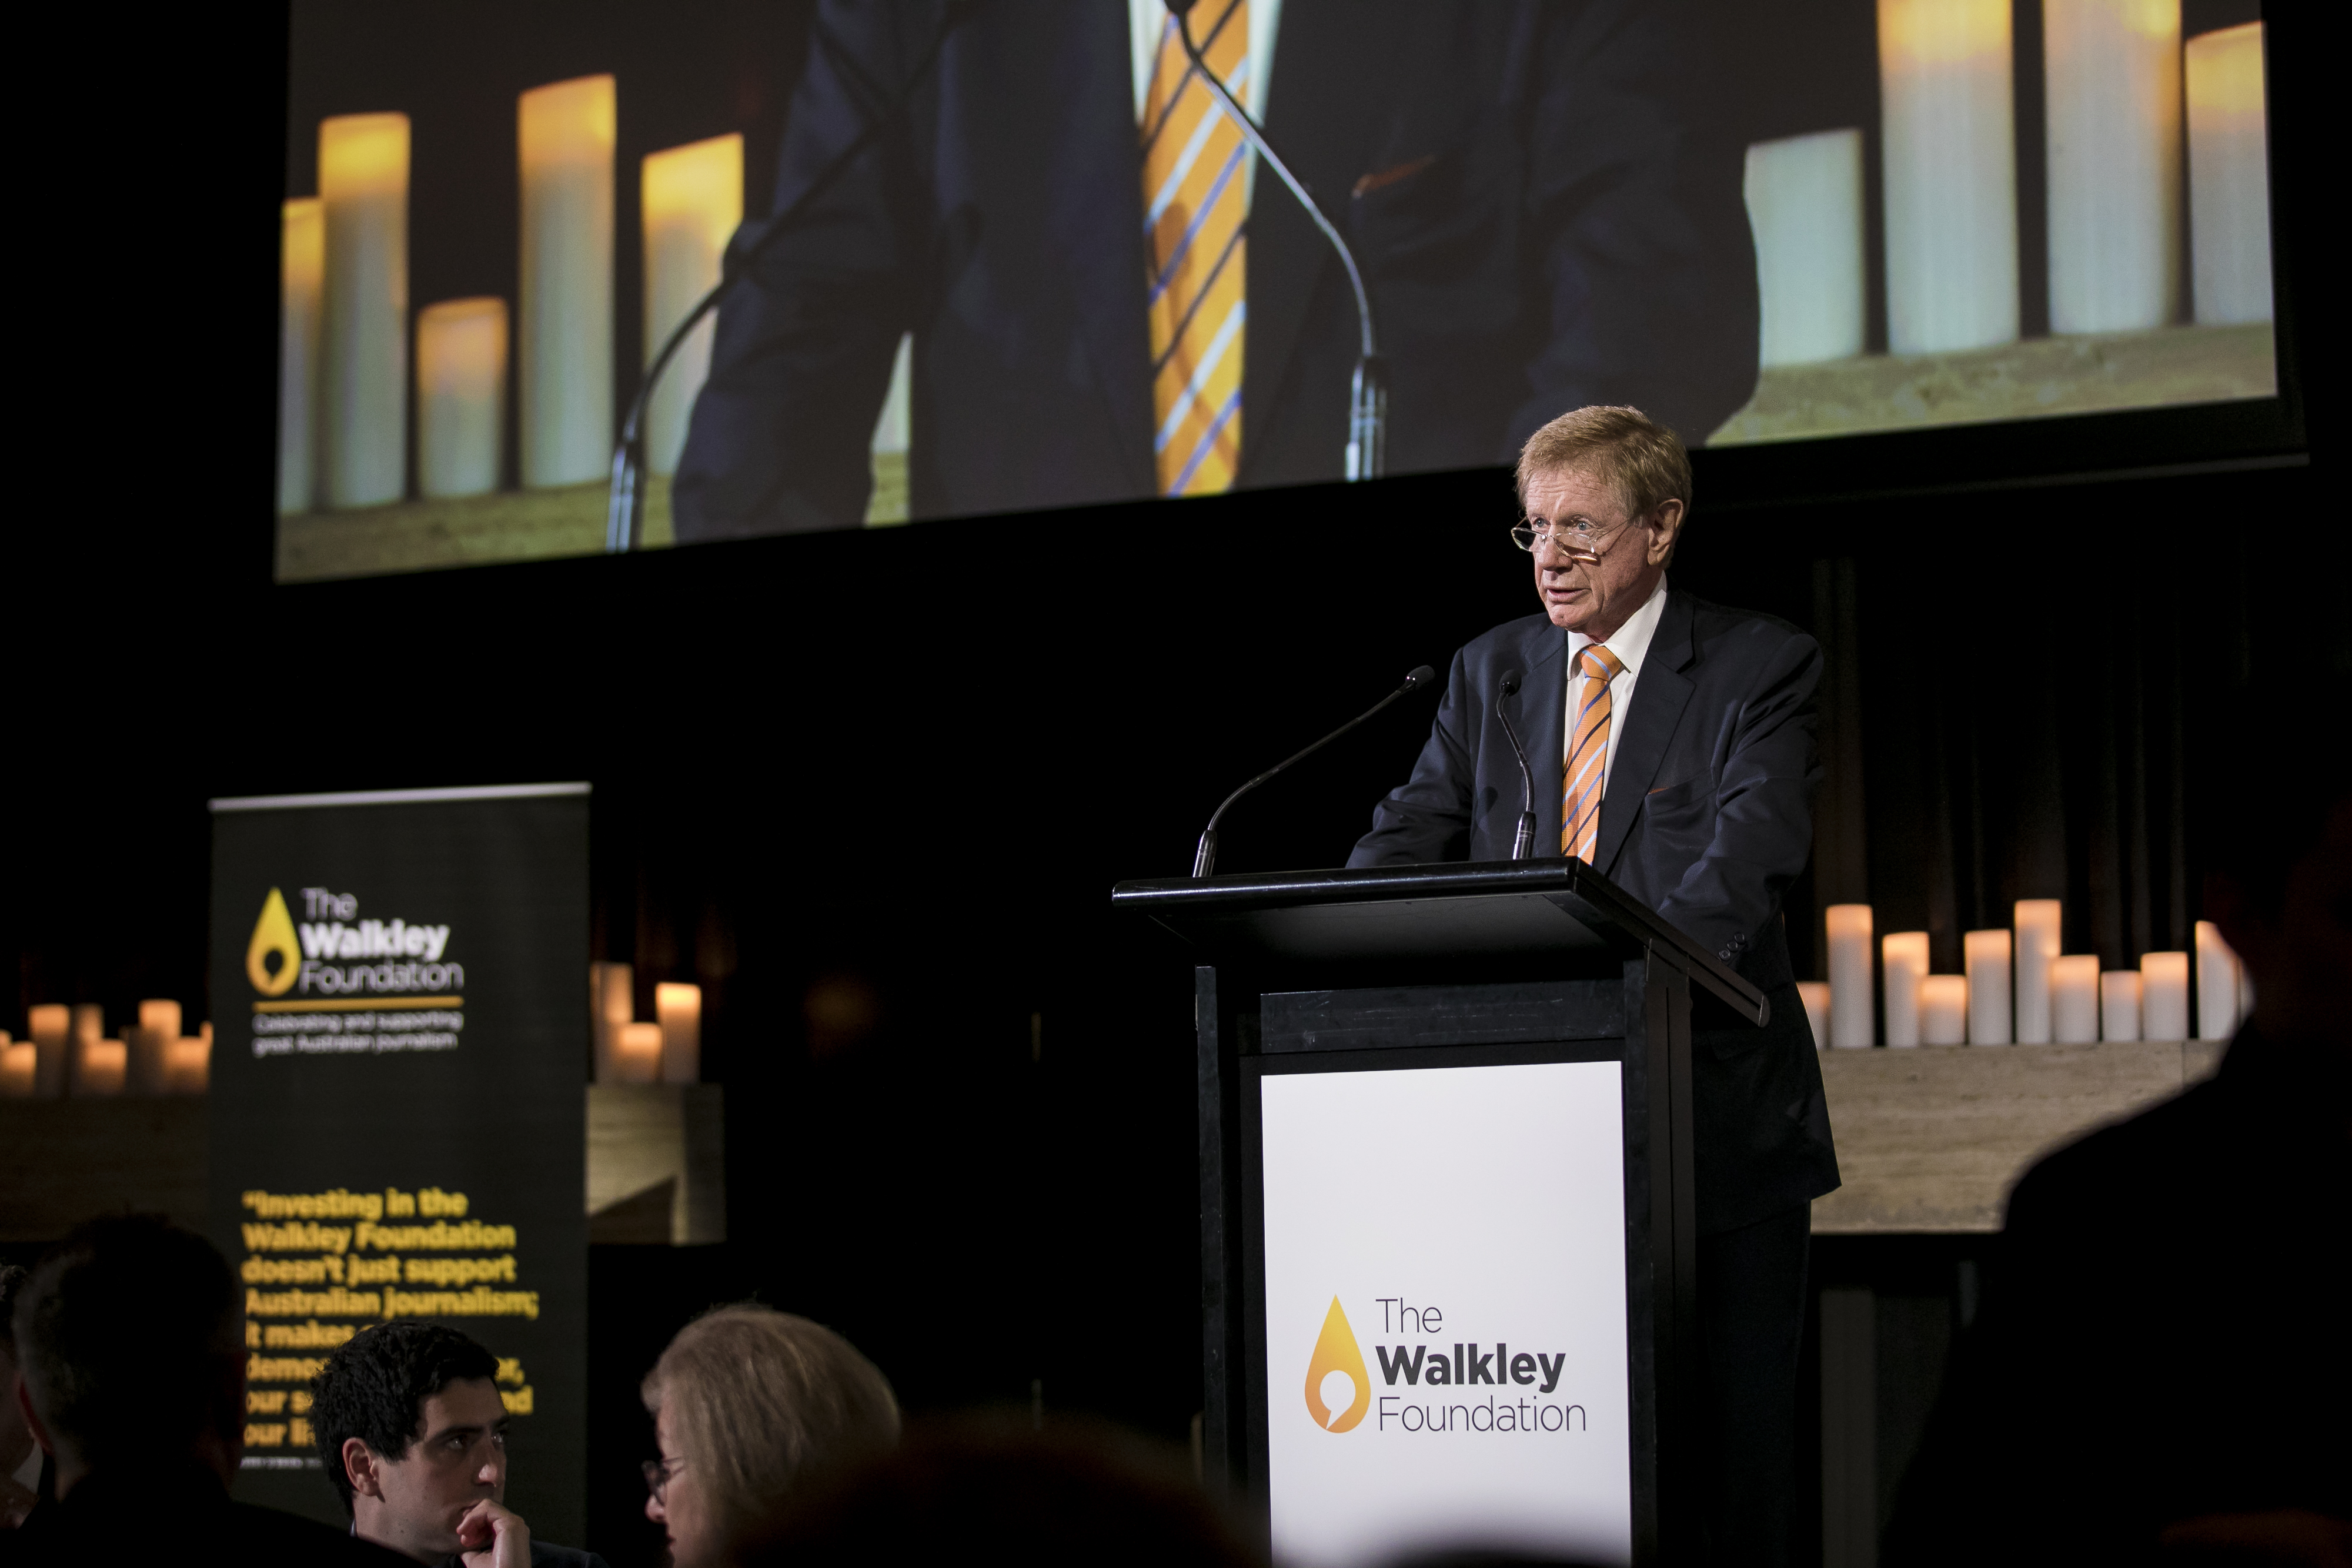 11 projects share $75,000 in inaugural Walkley Grants for Freelance Journalism